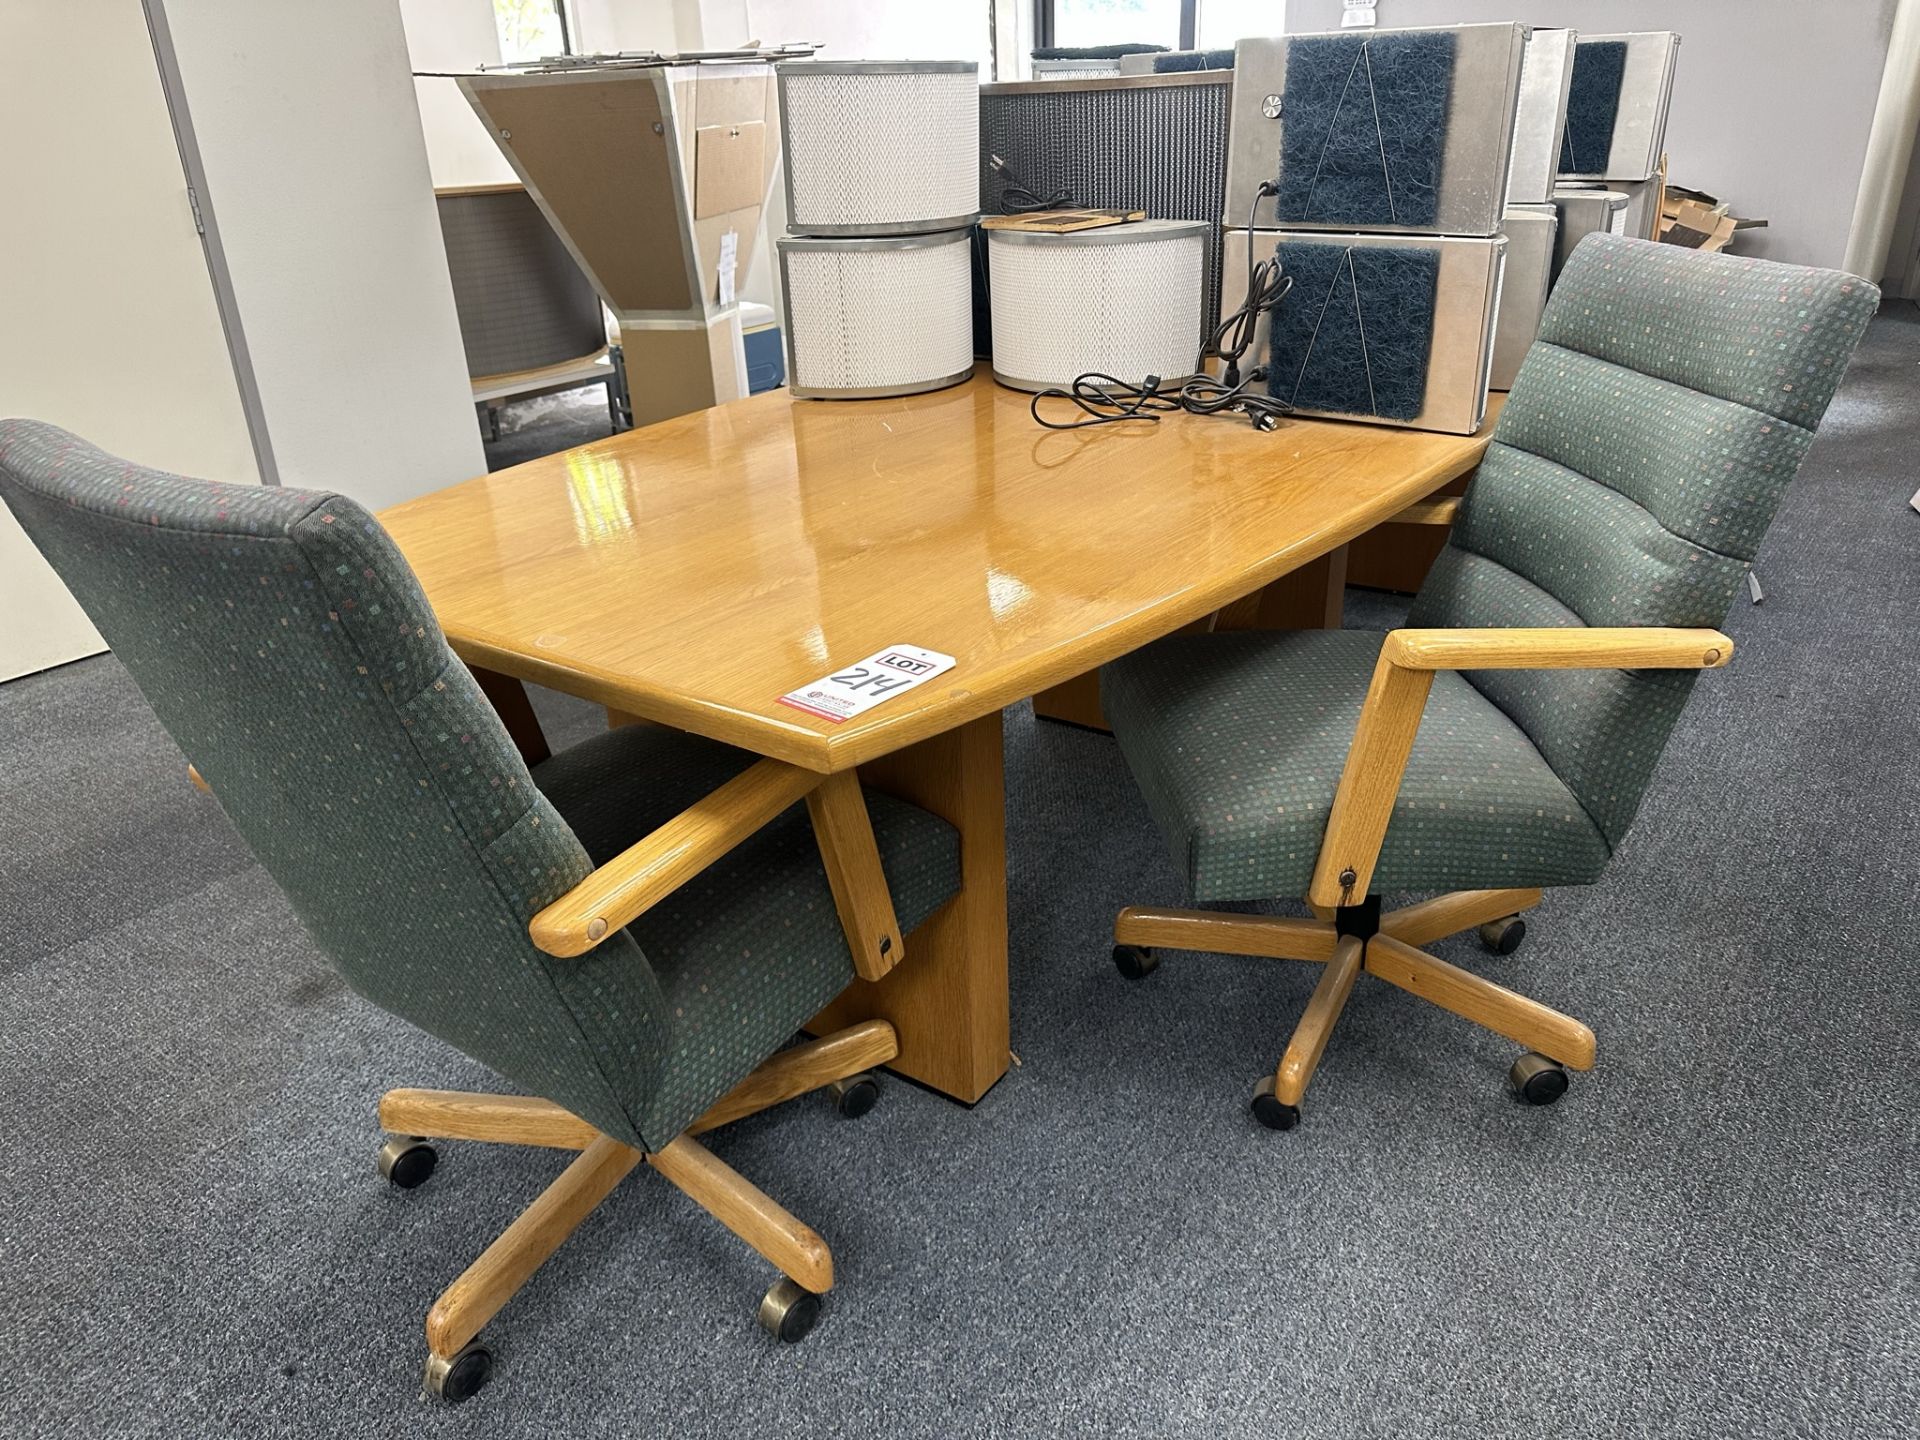 LOT - CONFERENCE TABLE AND CHAIRS, FILTERS ON TABLE ARE NOT INCLUDED